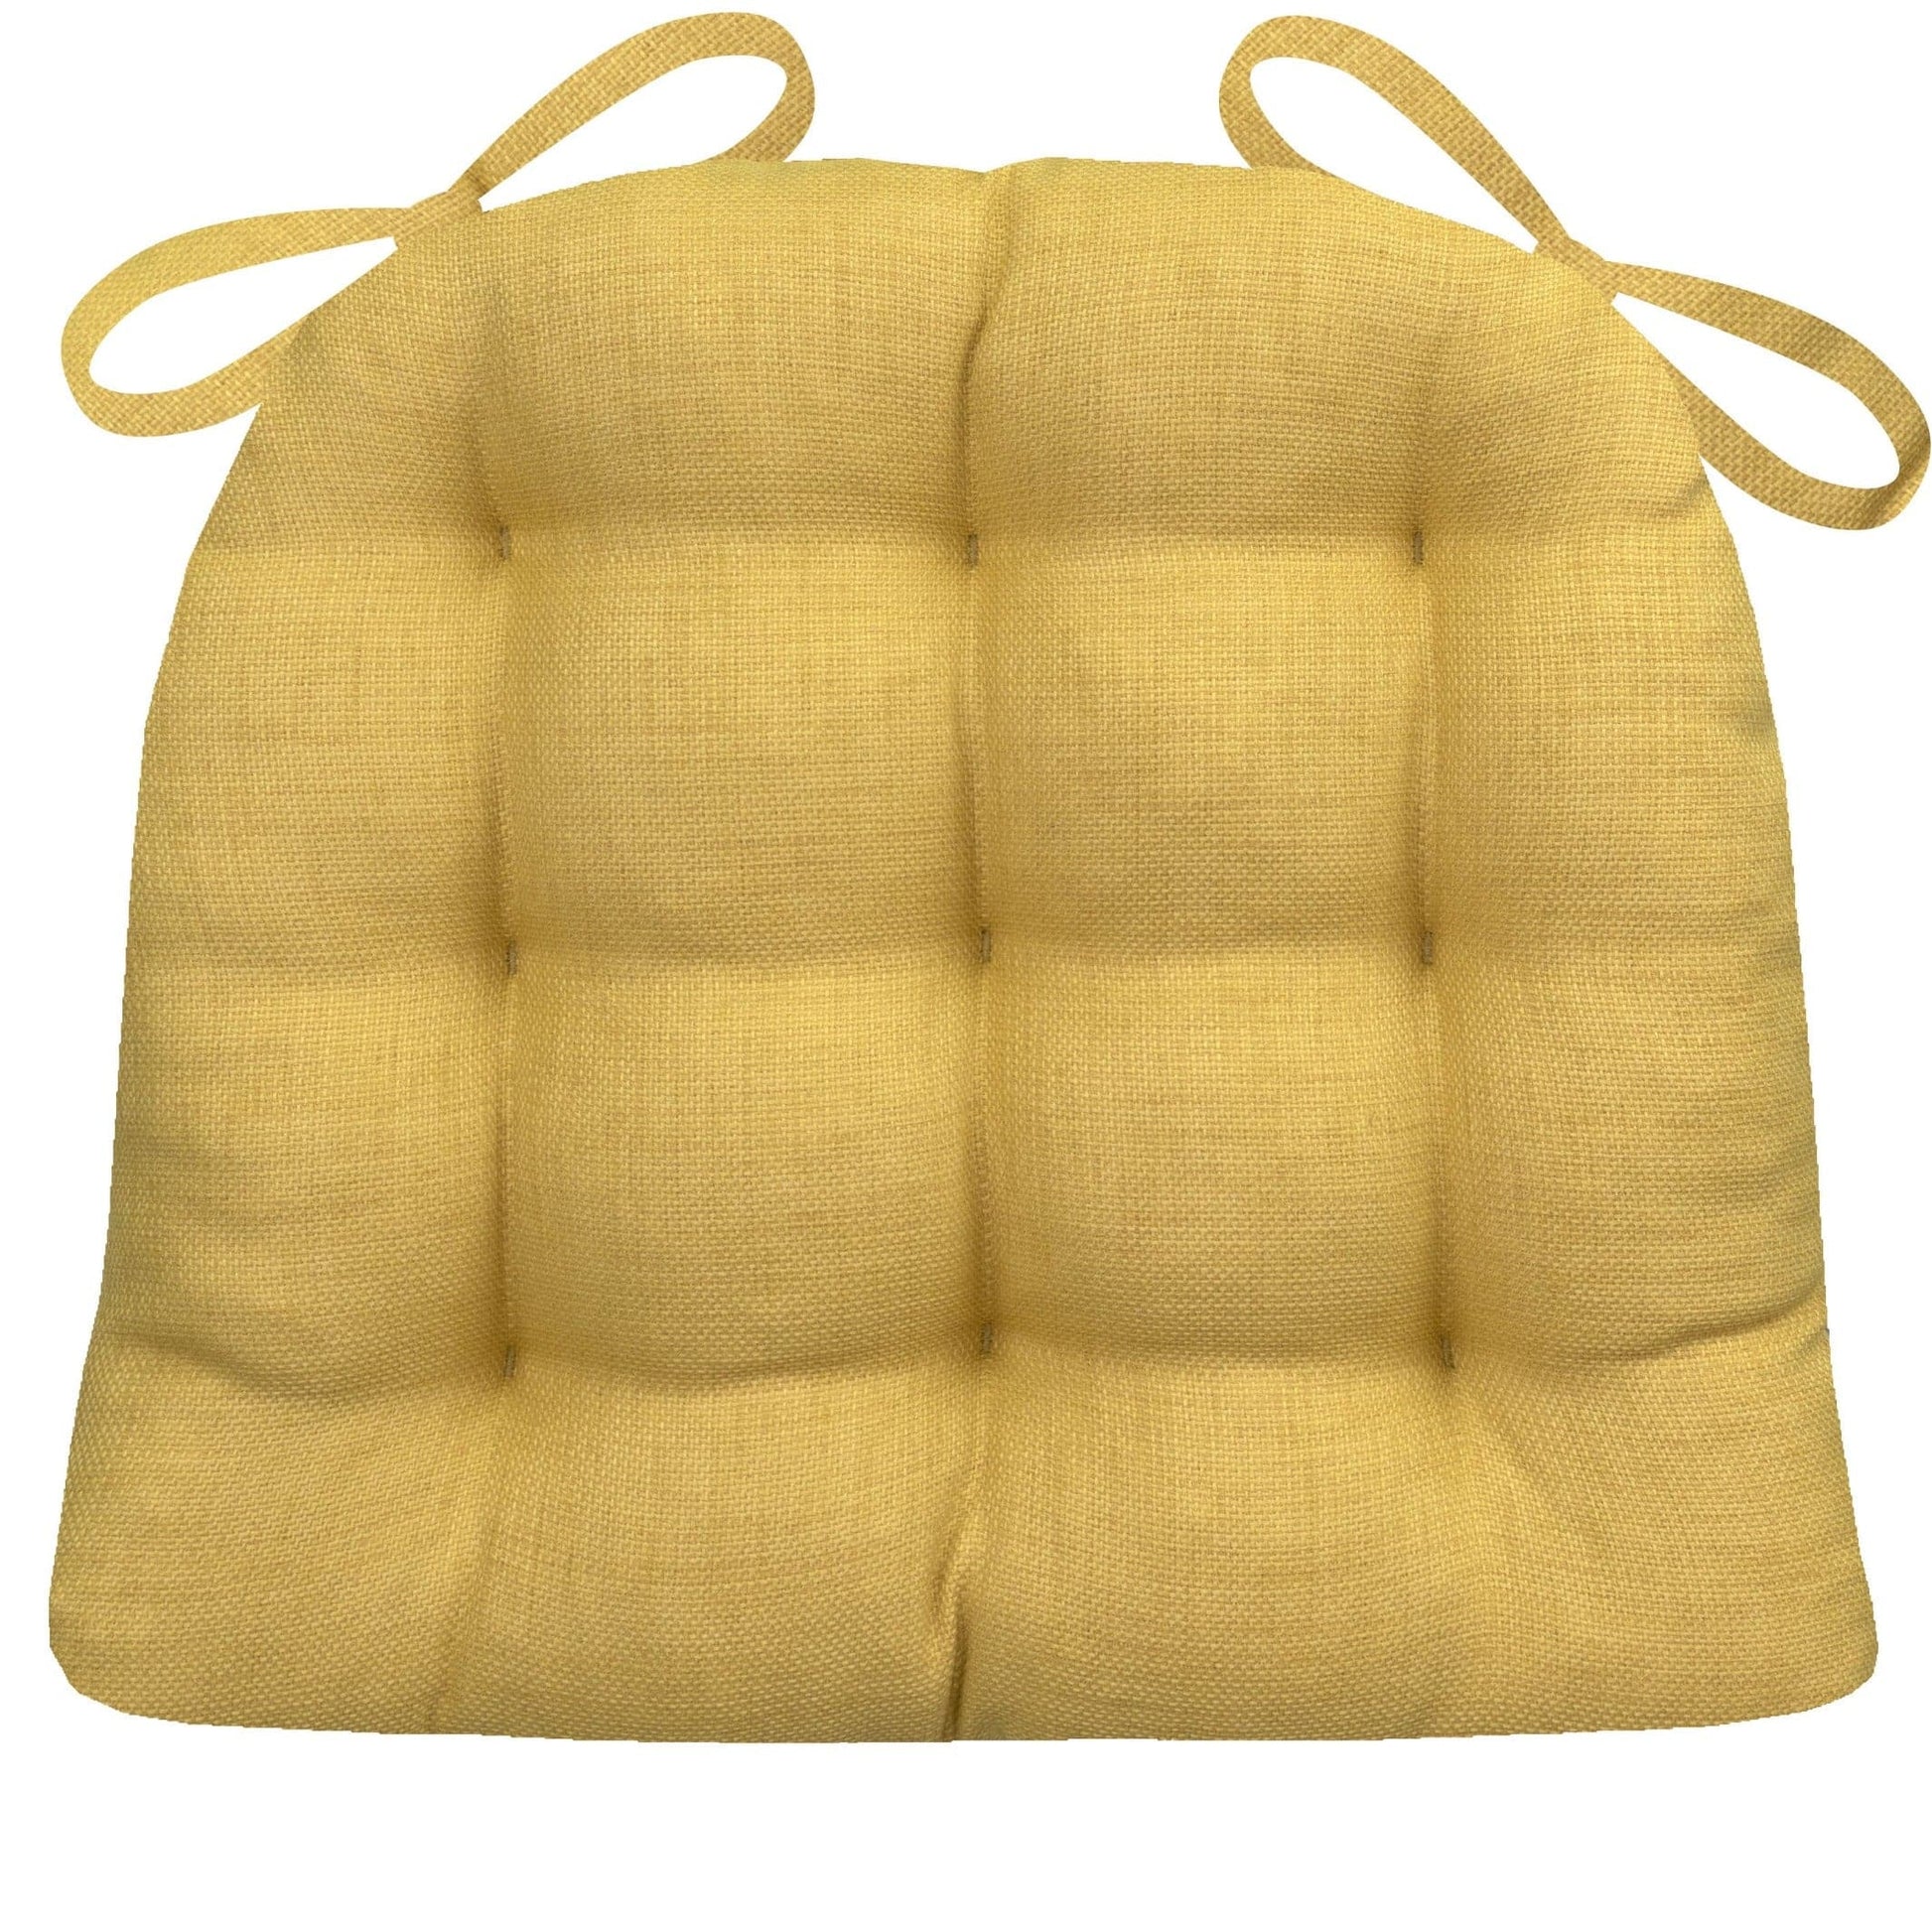 Tufted Outdoor Dining Chair Cushion